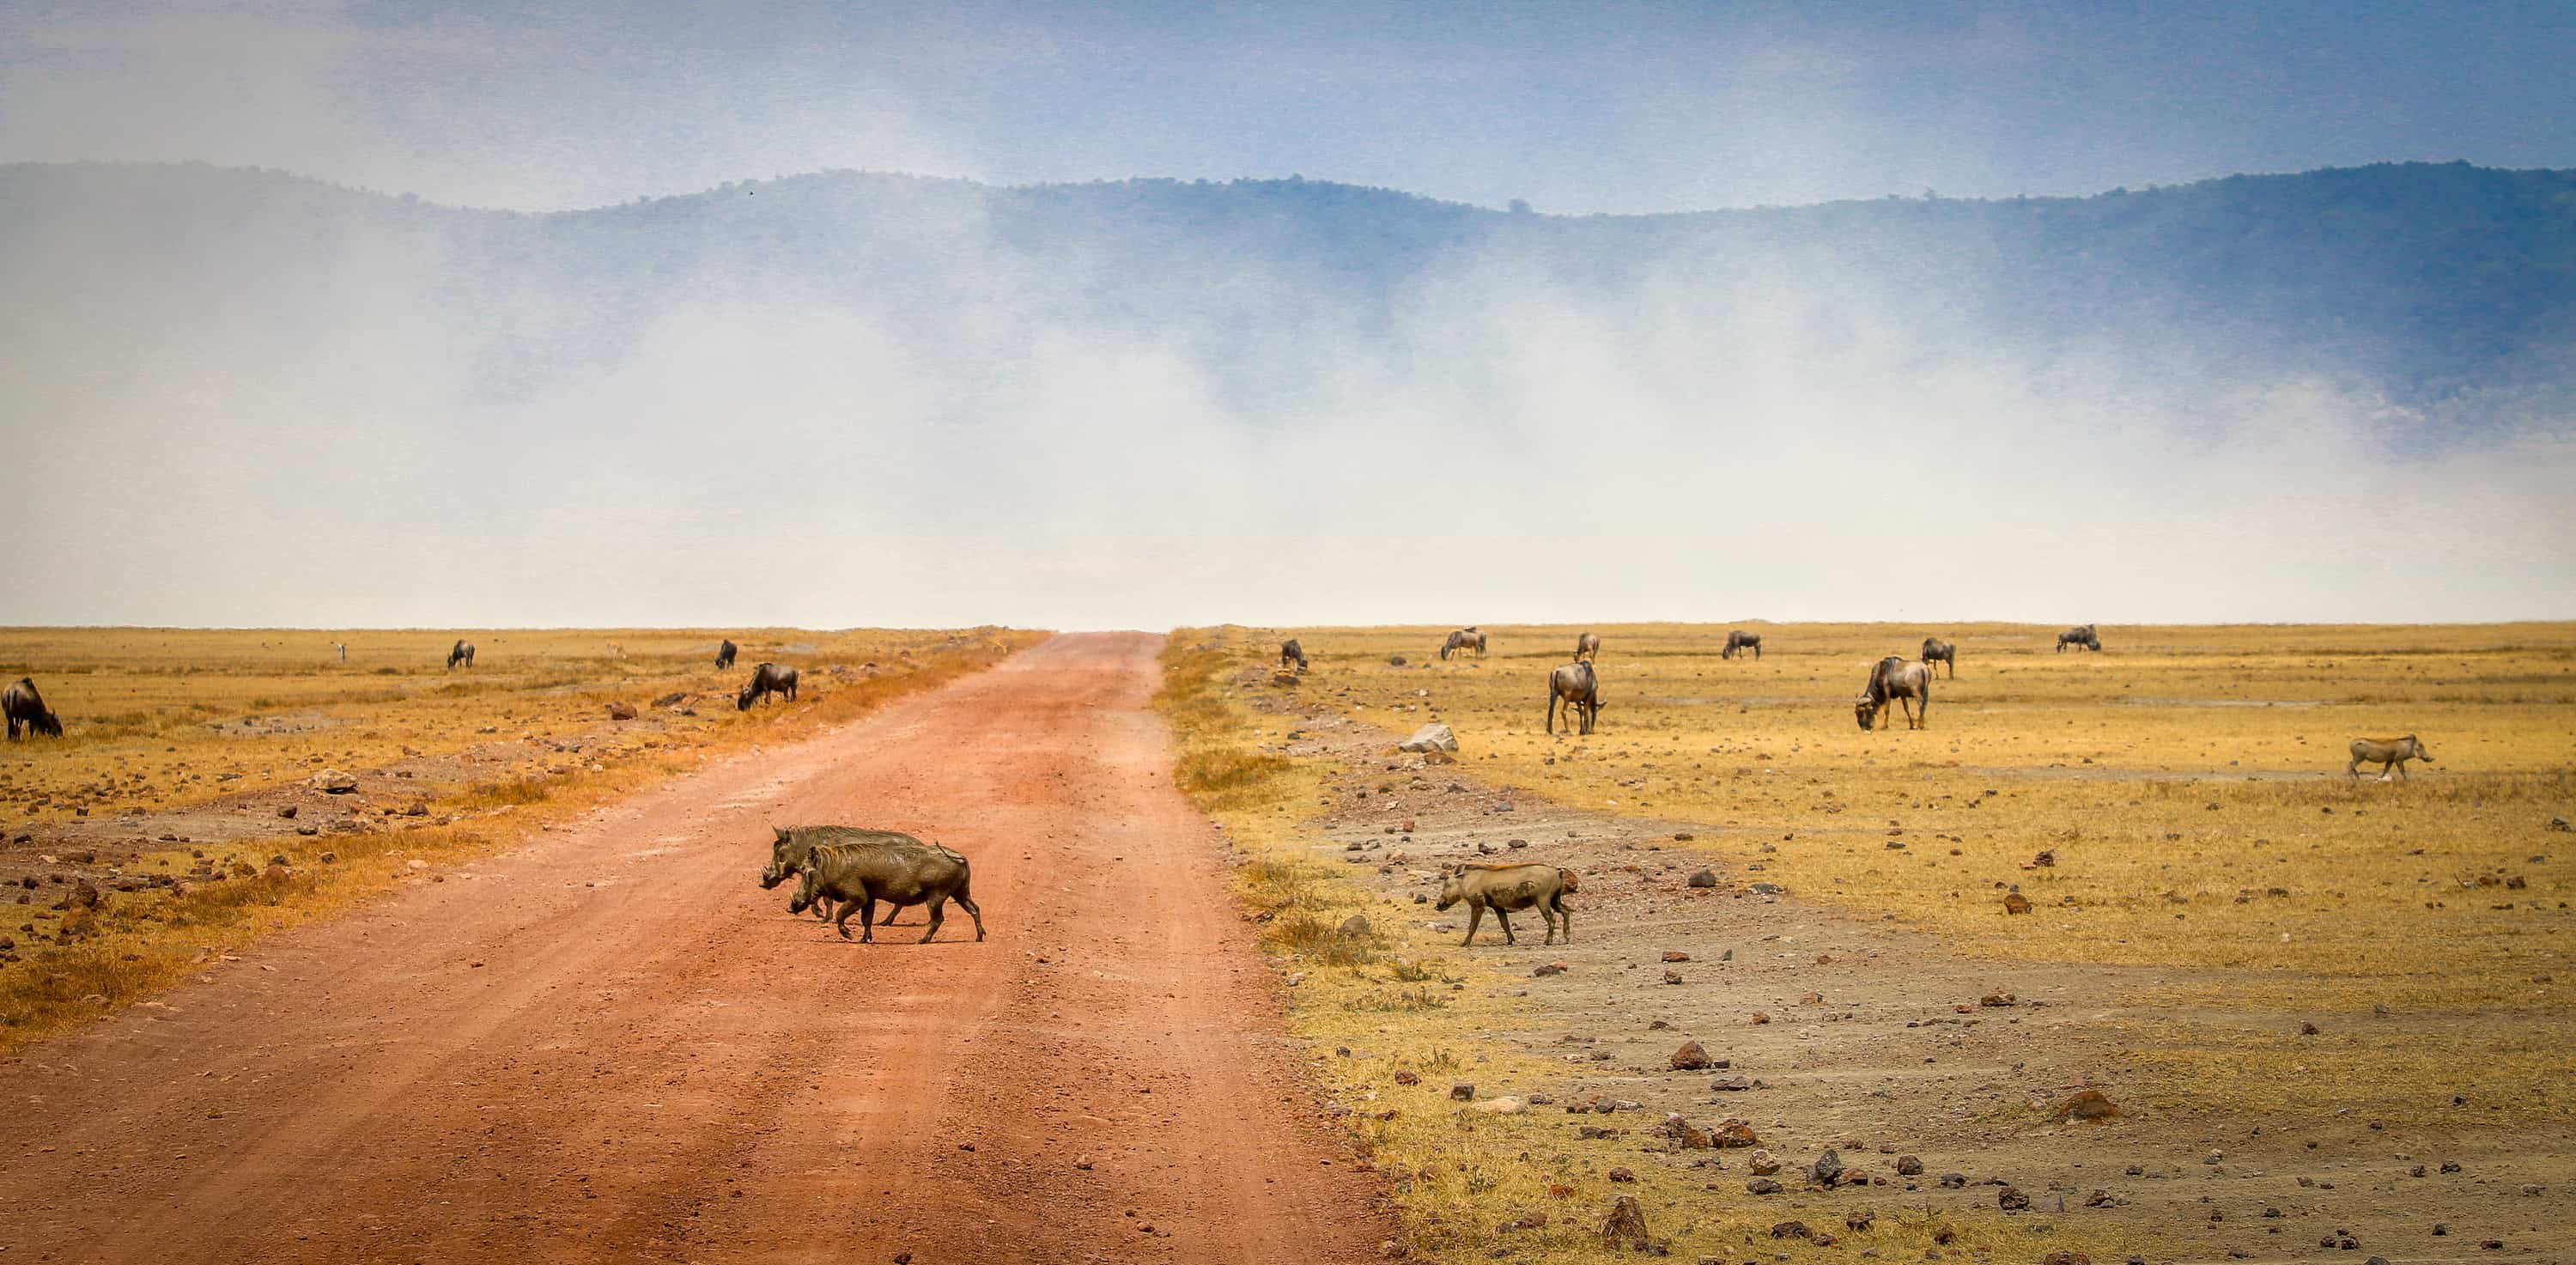 Warthog Family Crossing in Tanzania's Ngorongoro Conservation Area